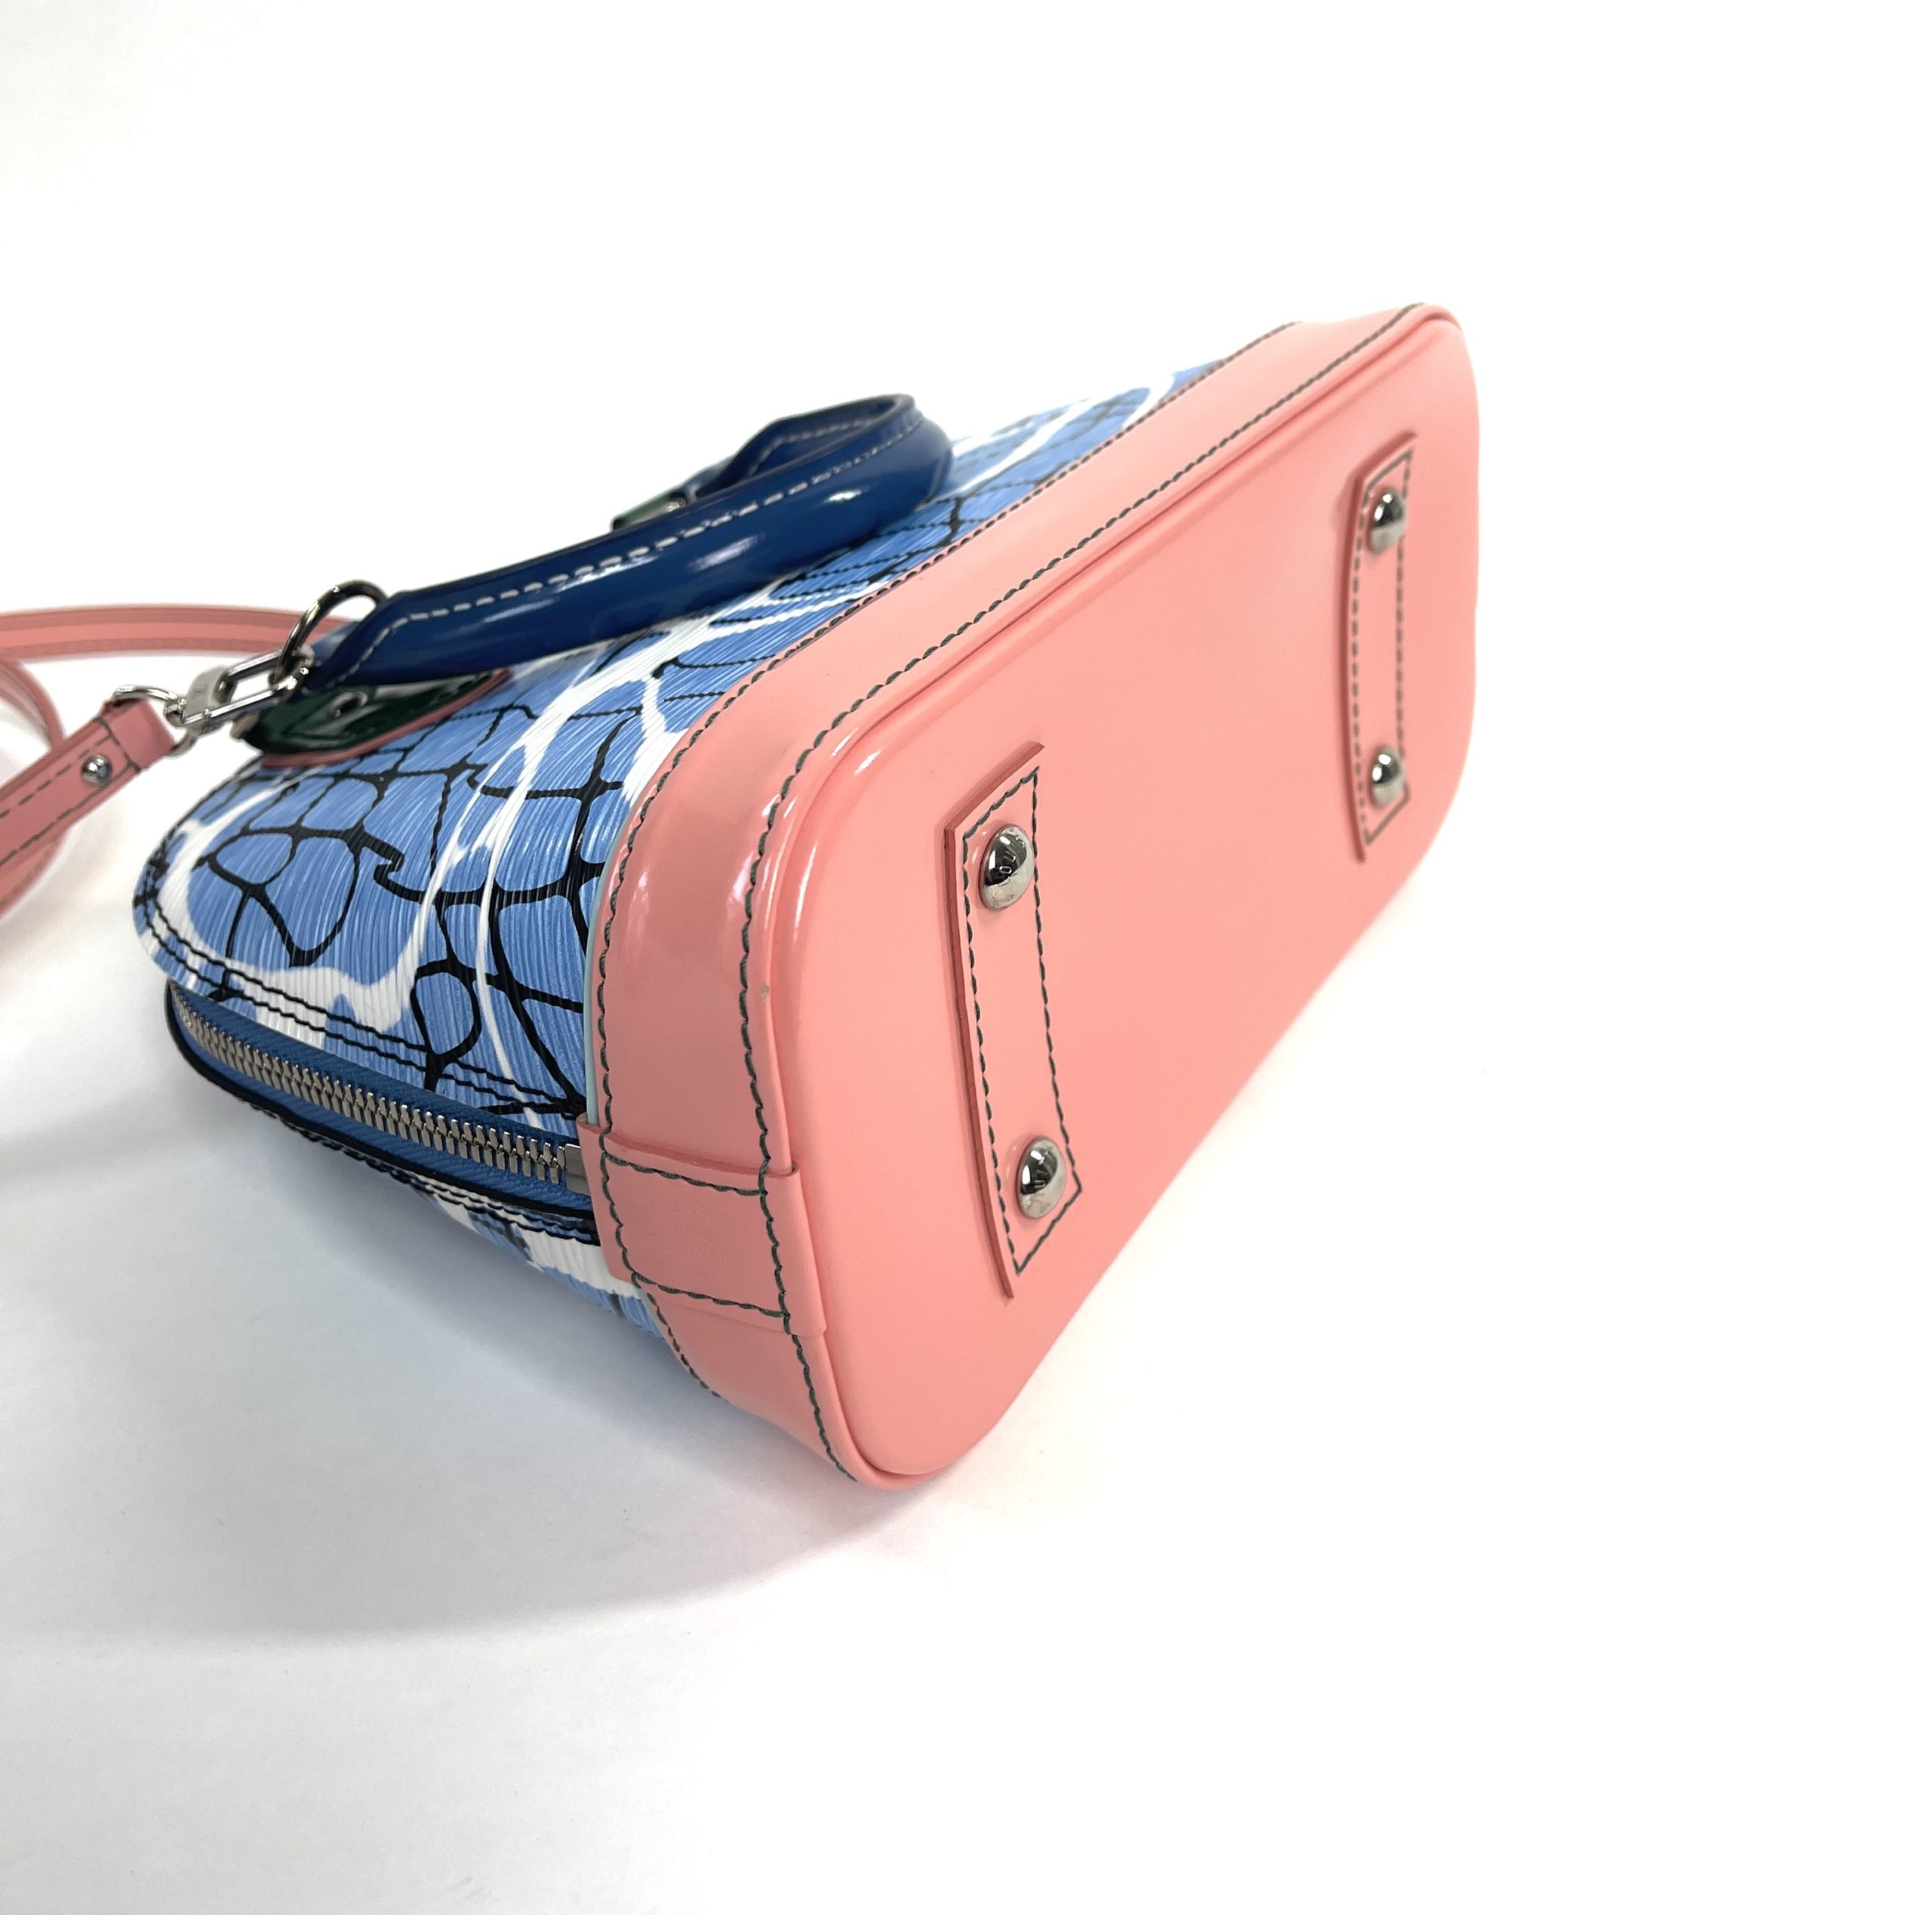 Alma BB Limited Edition bag in pink epi leather Louis Vuitton